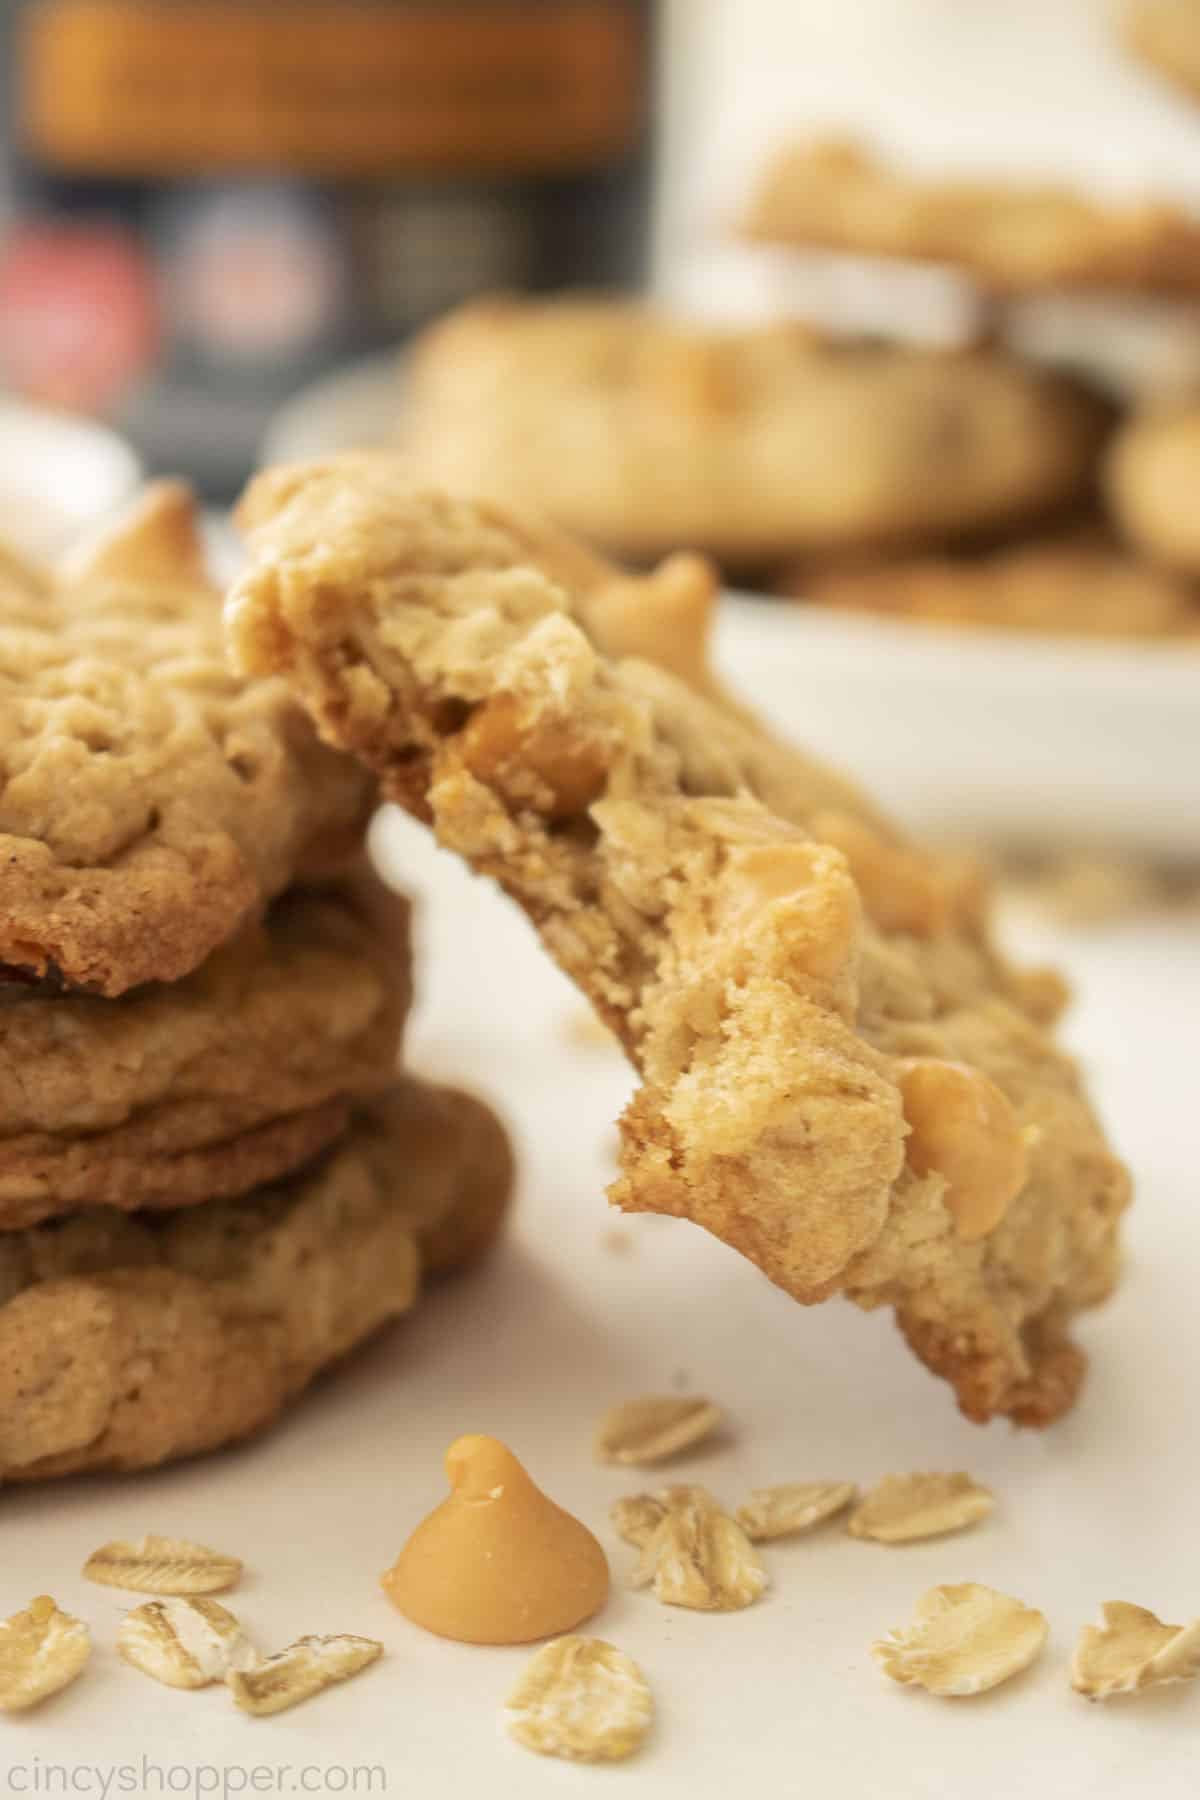 Butterscotch cookies with a bite.